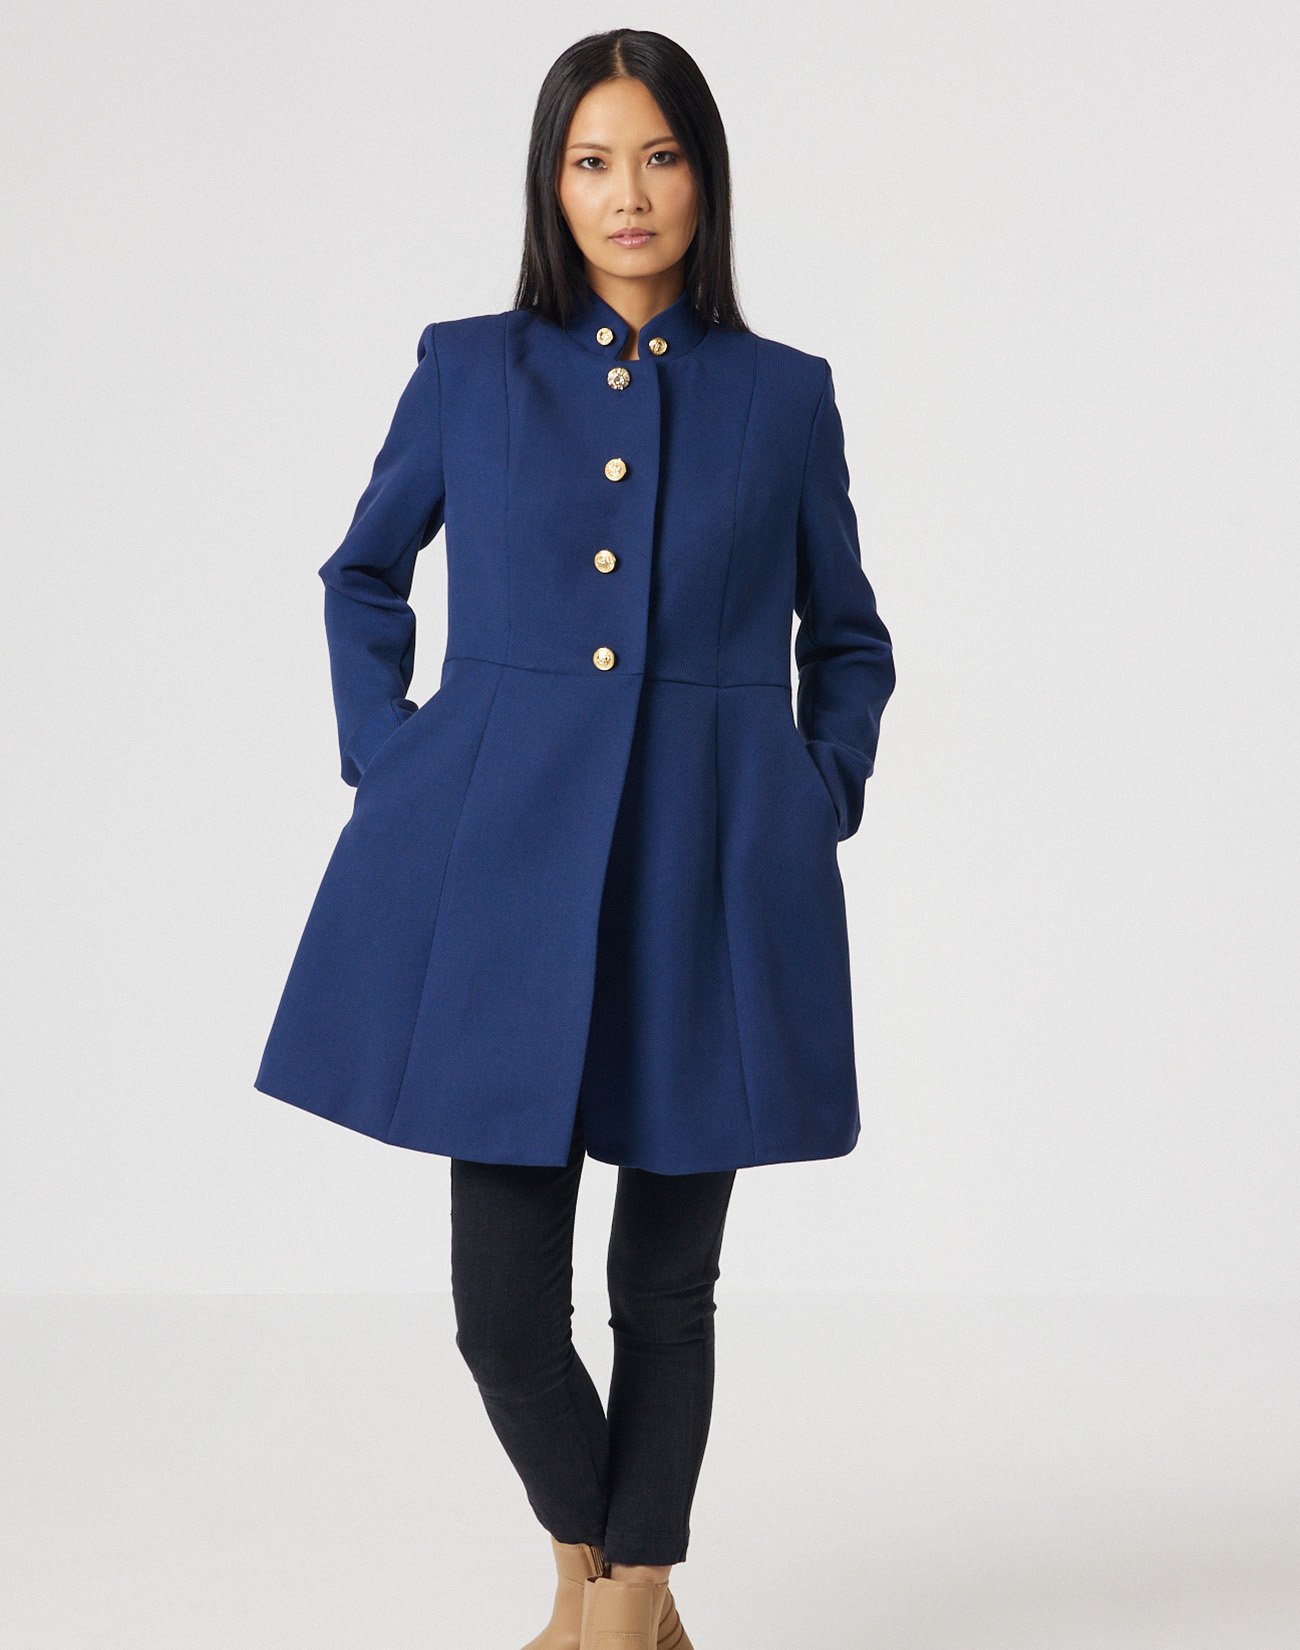 Coat with jewel buttons